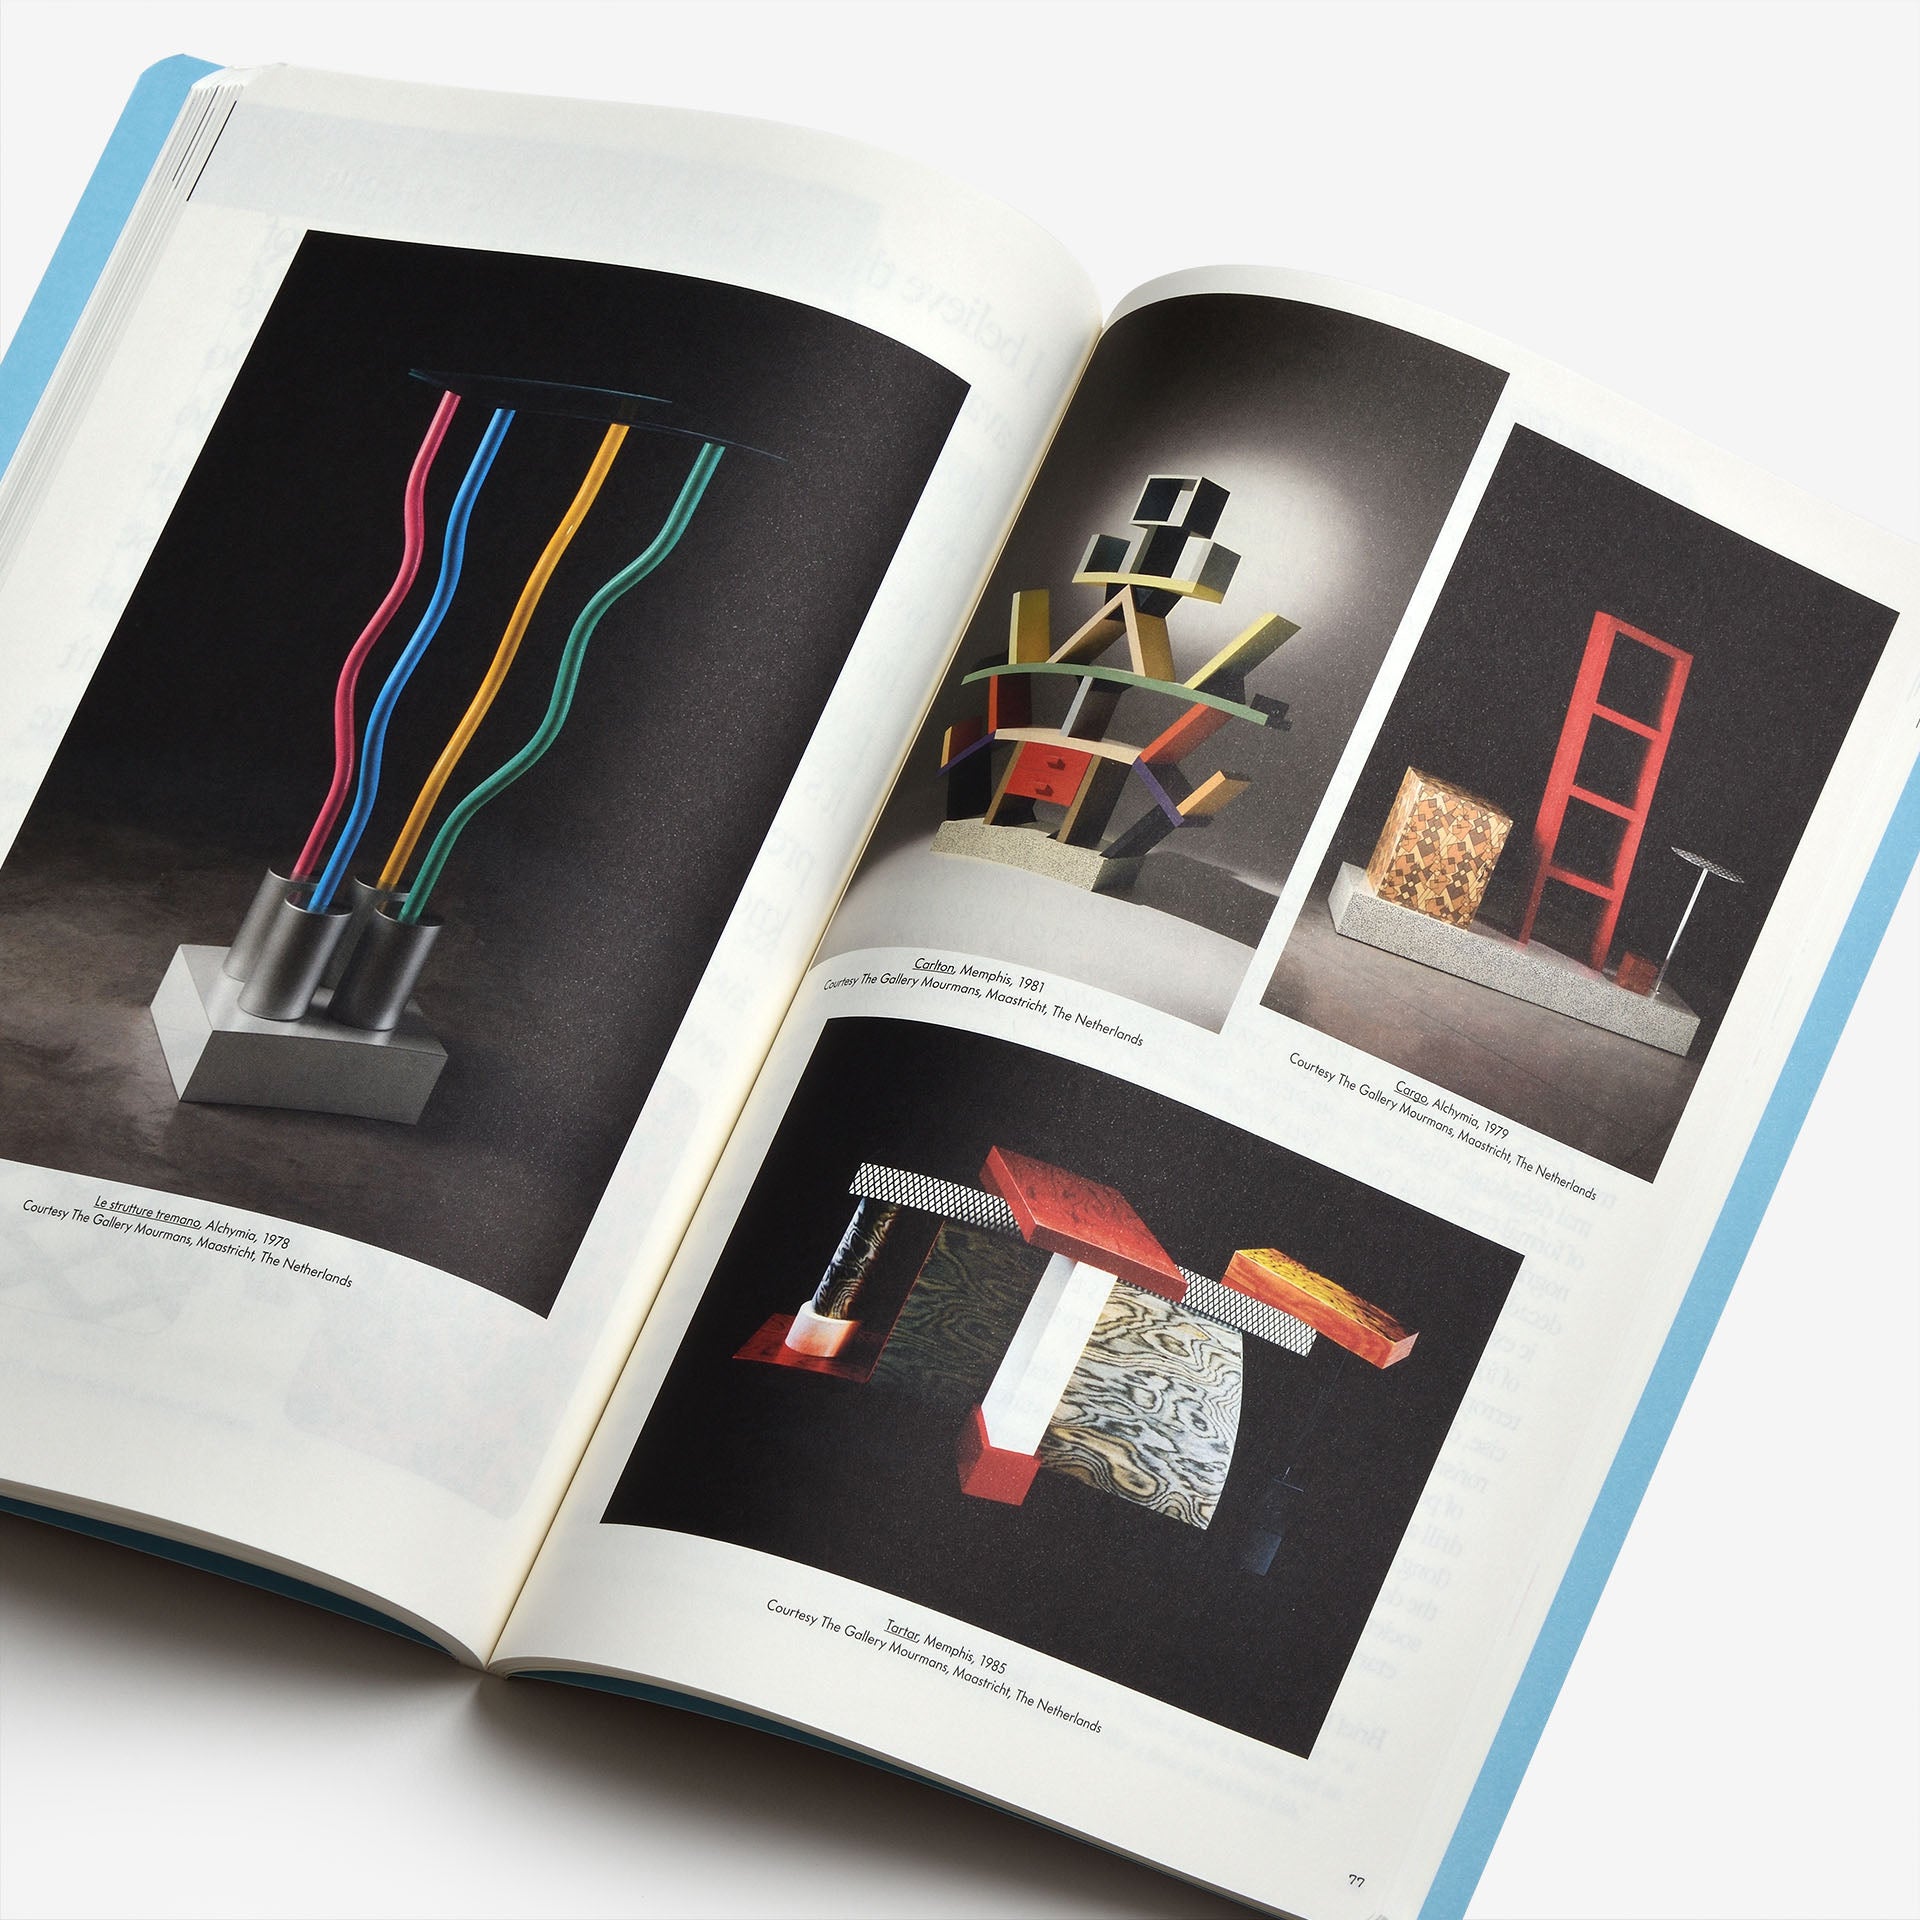 Ettore Sottsass: There is a Planet. Exhibition Catalogue. Triennale Design Museum.